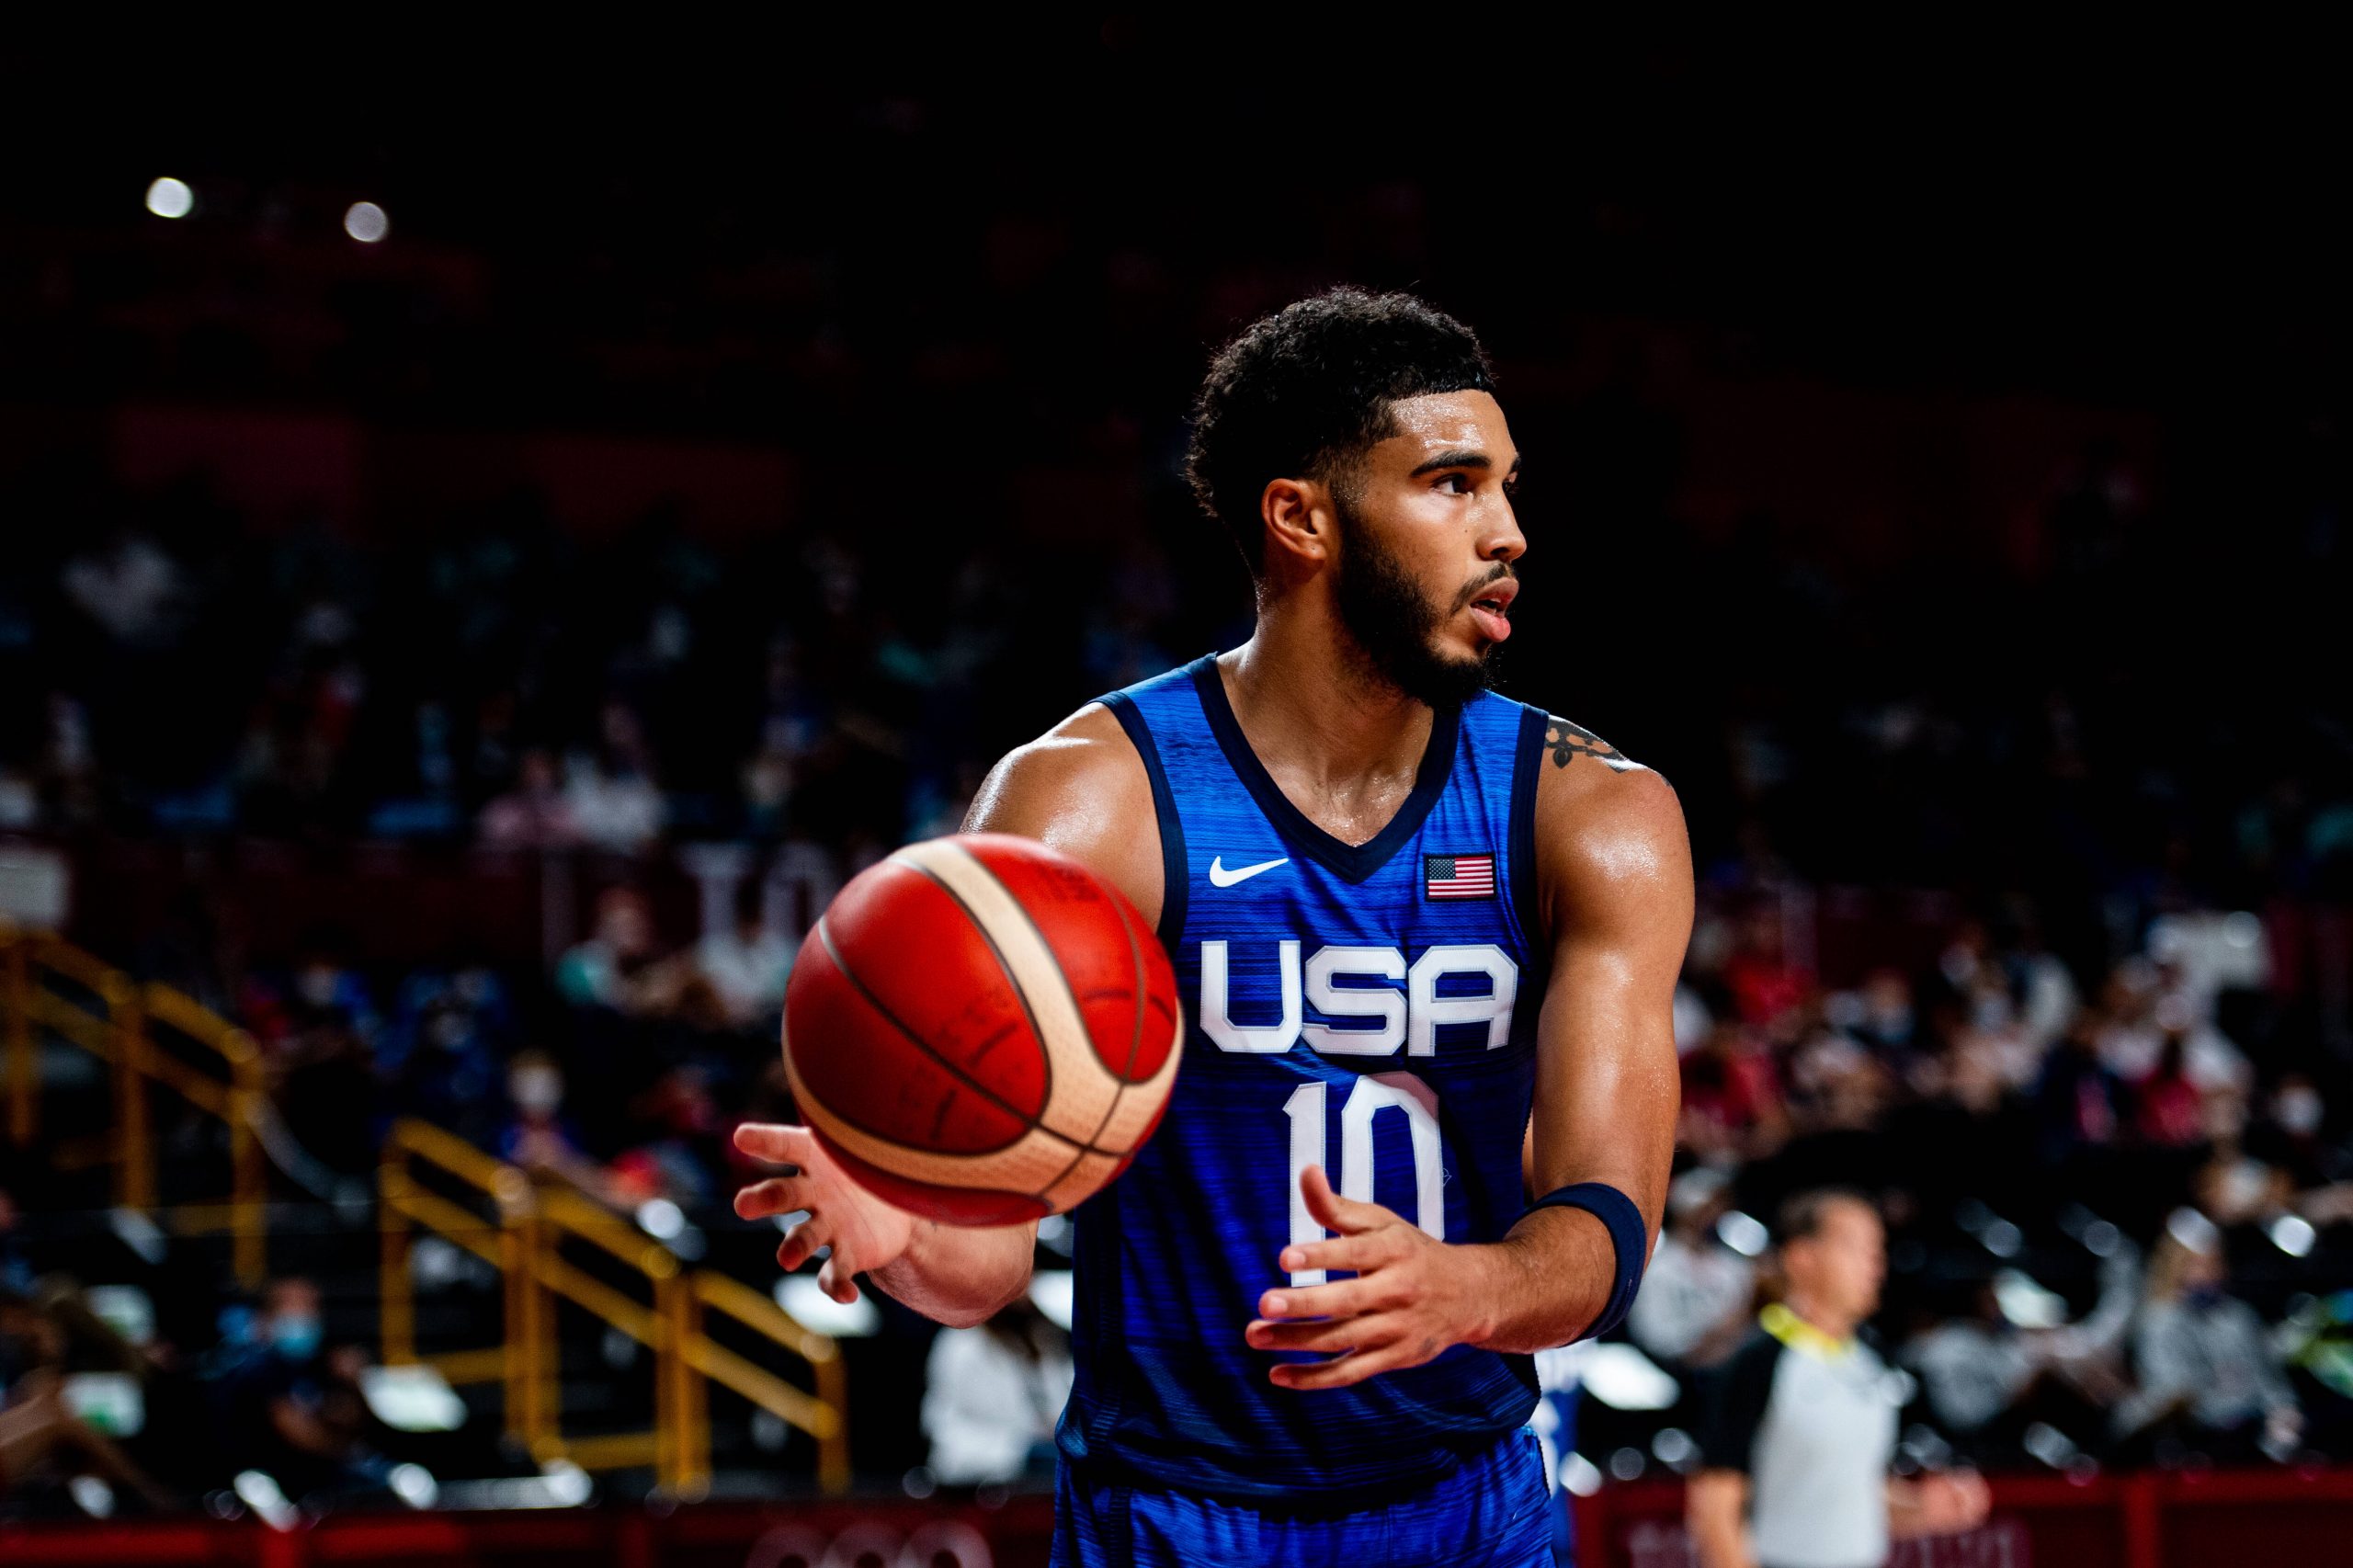 The USA are favourites to win the Olympic gold in basketball in 2020